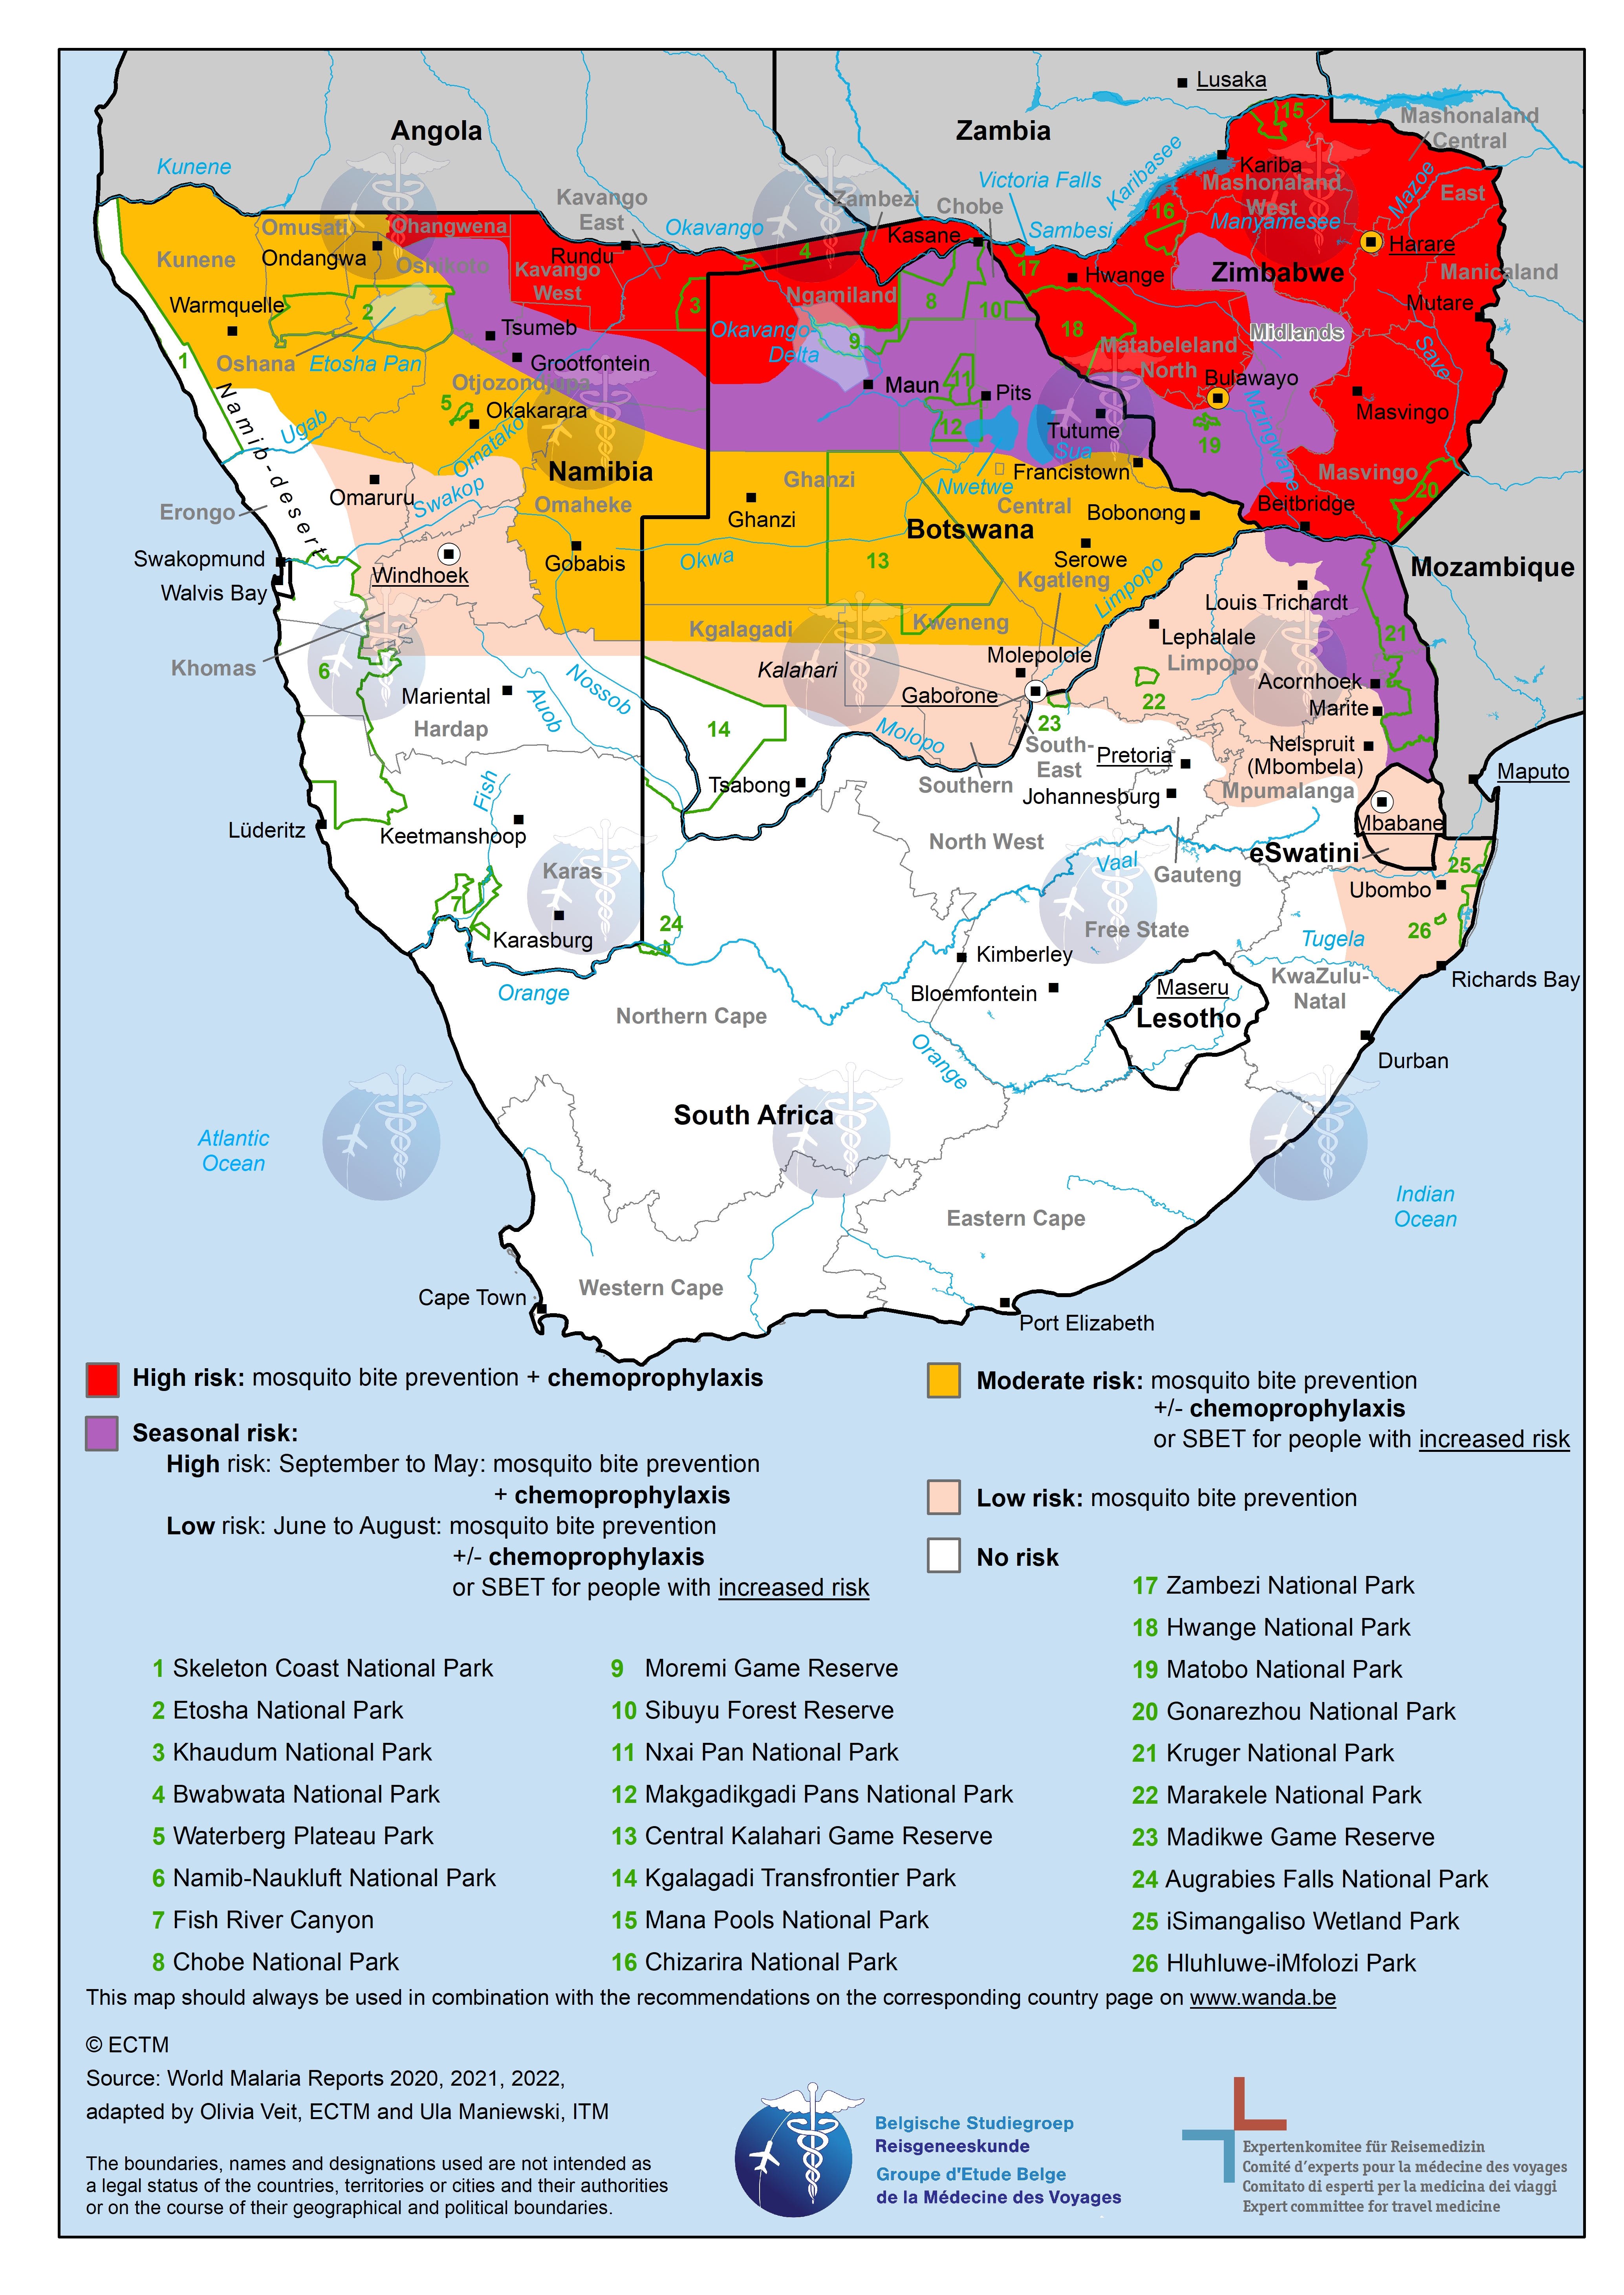 Map of South Africa with malaria risk areas